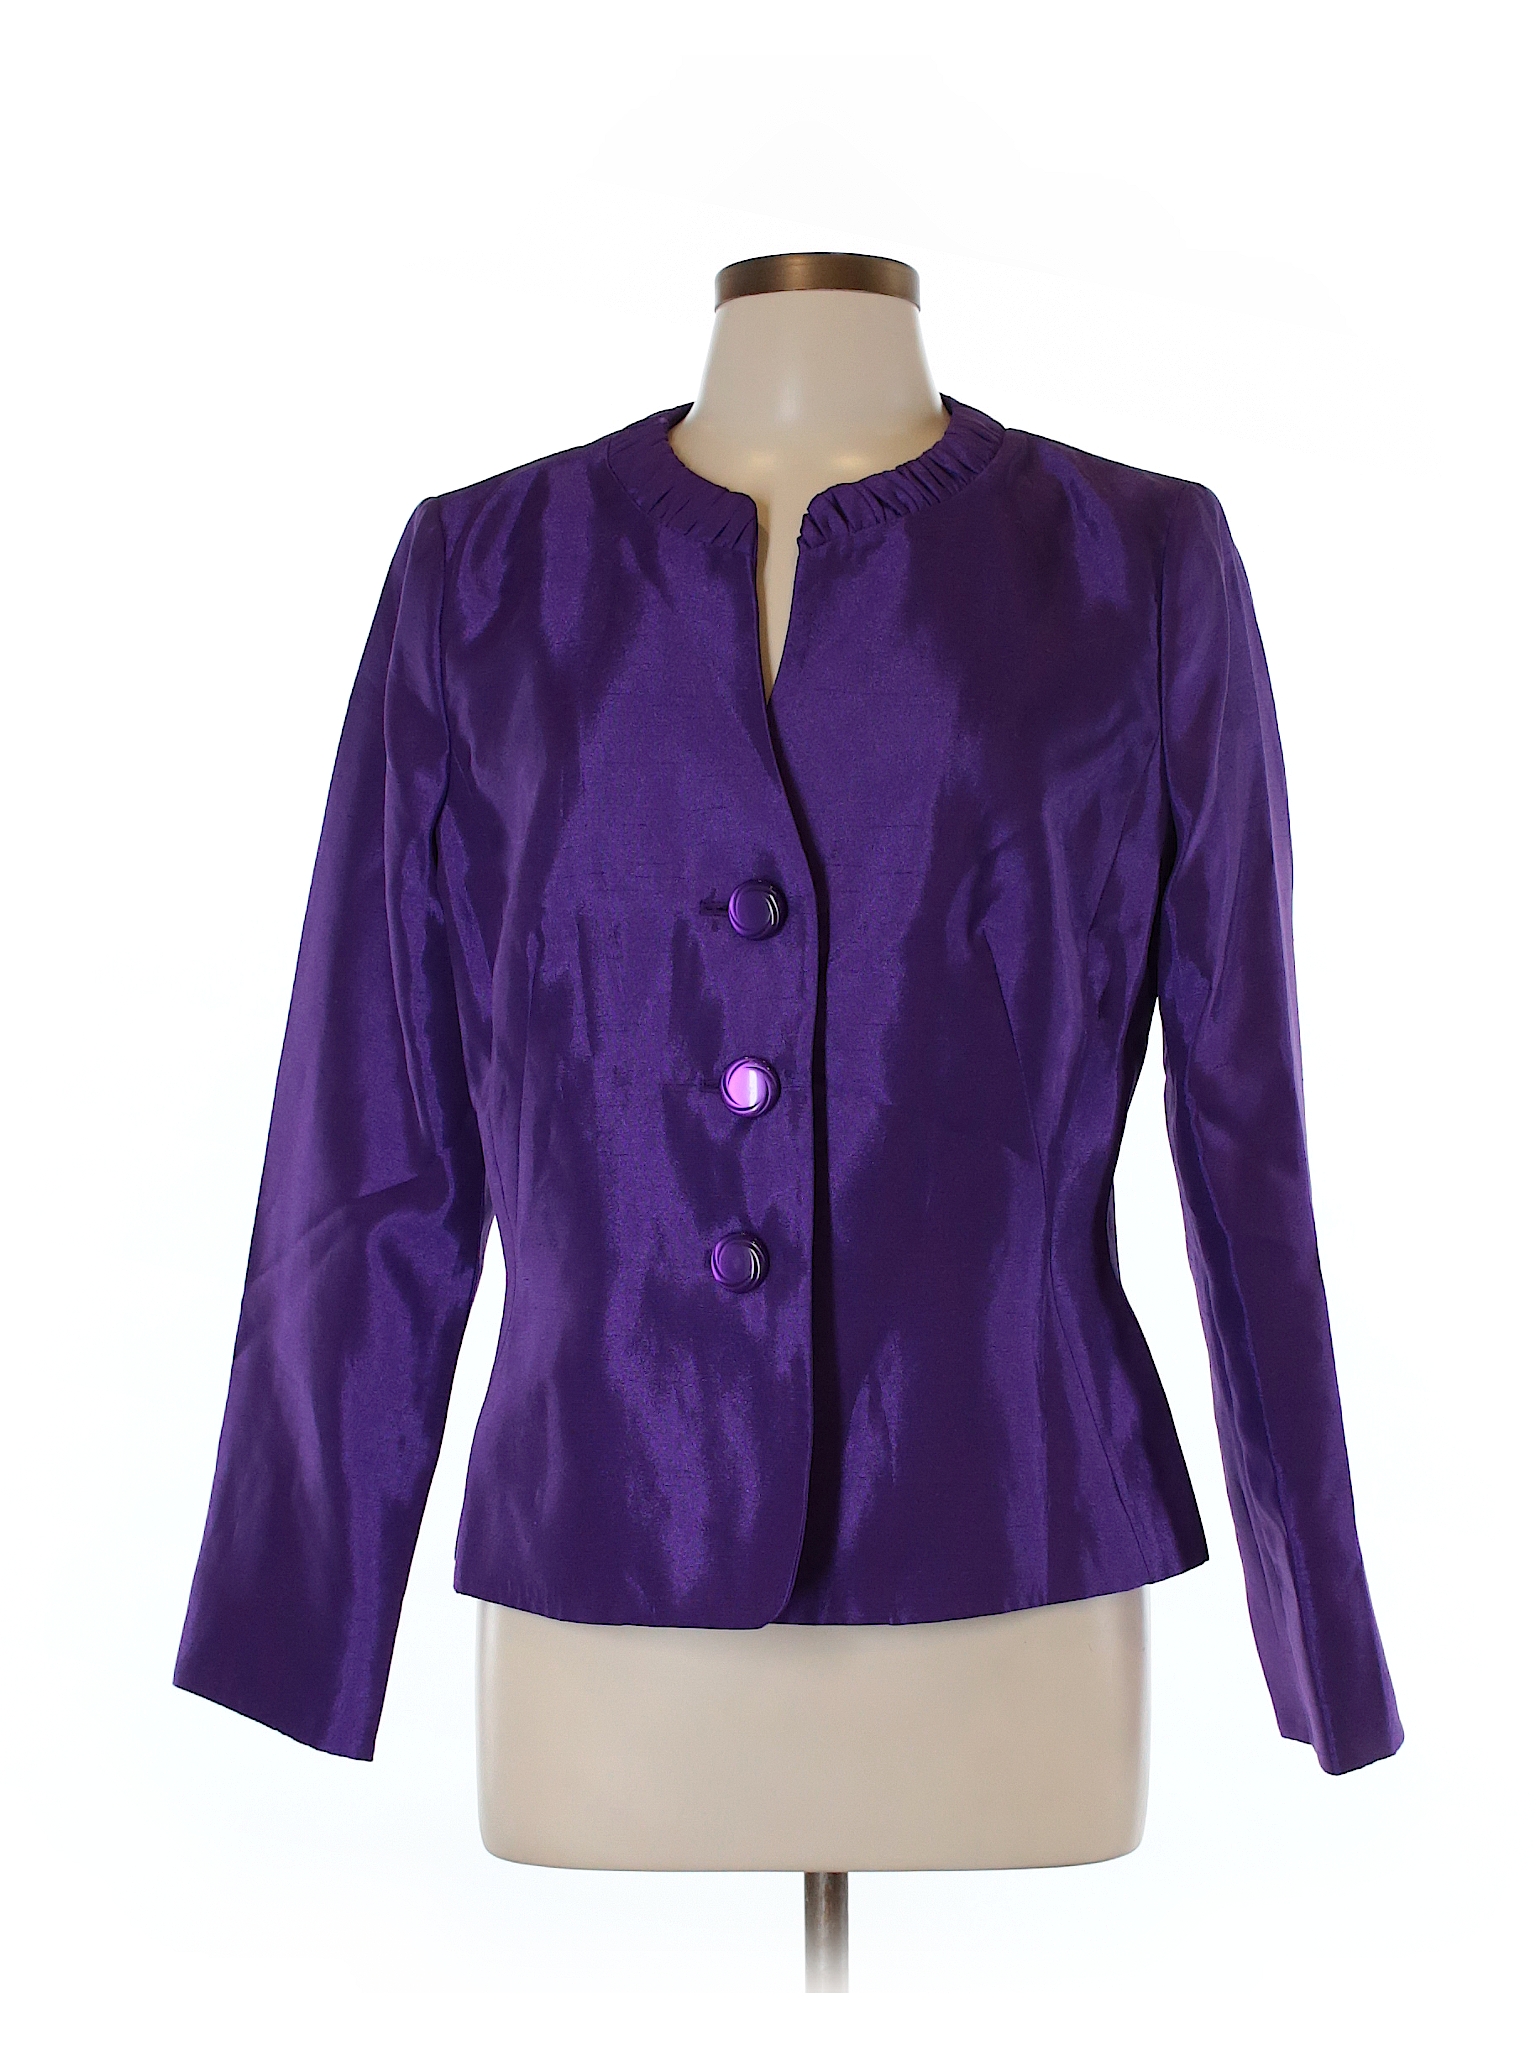 Le Suit 100% Polyester Solid Dark Purple Jacket Size 10 - 92 % off ...